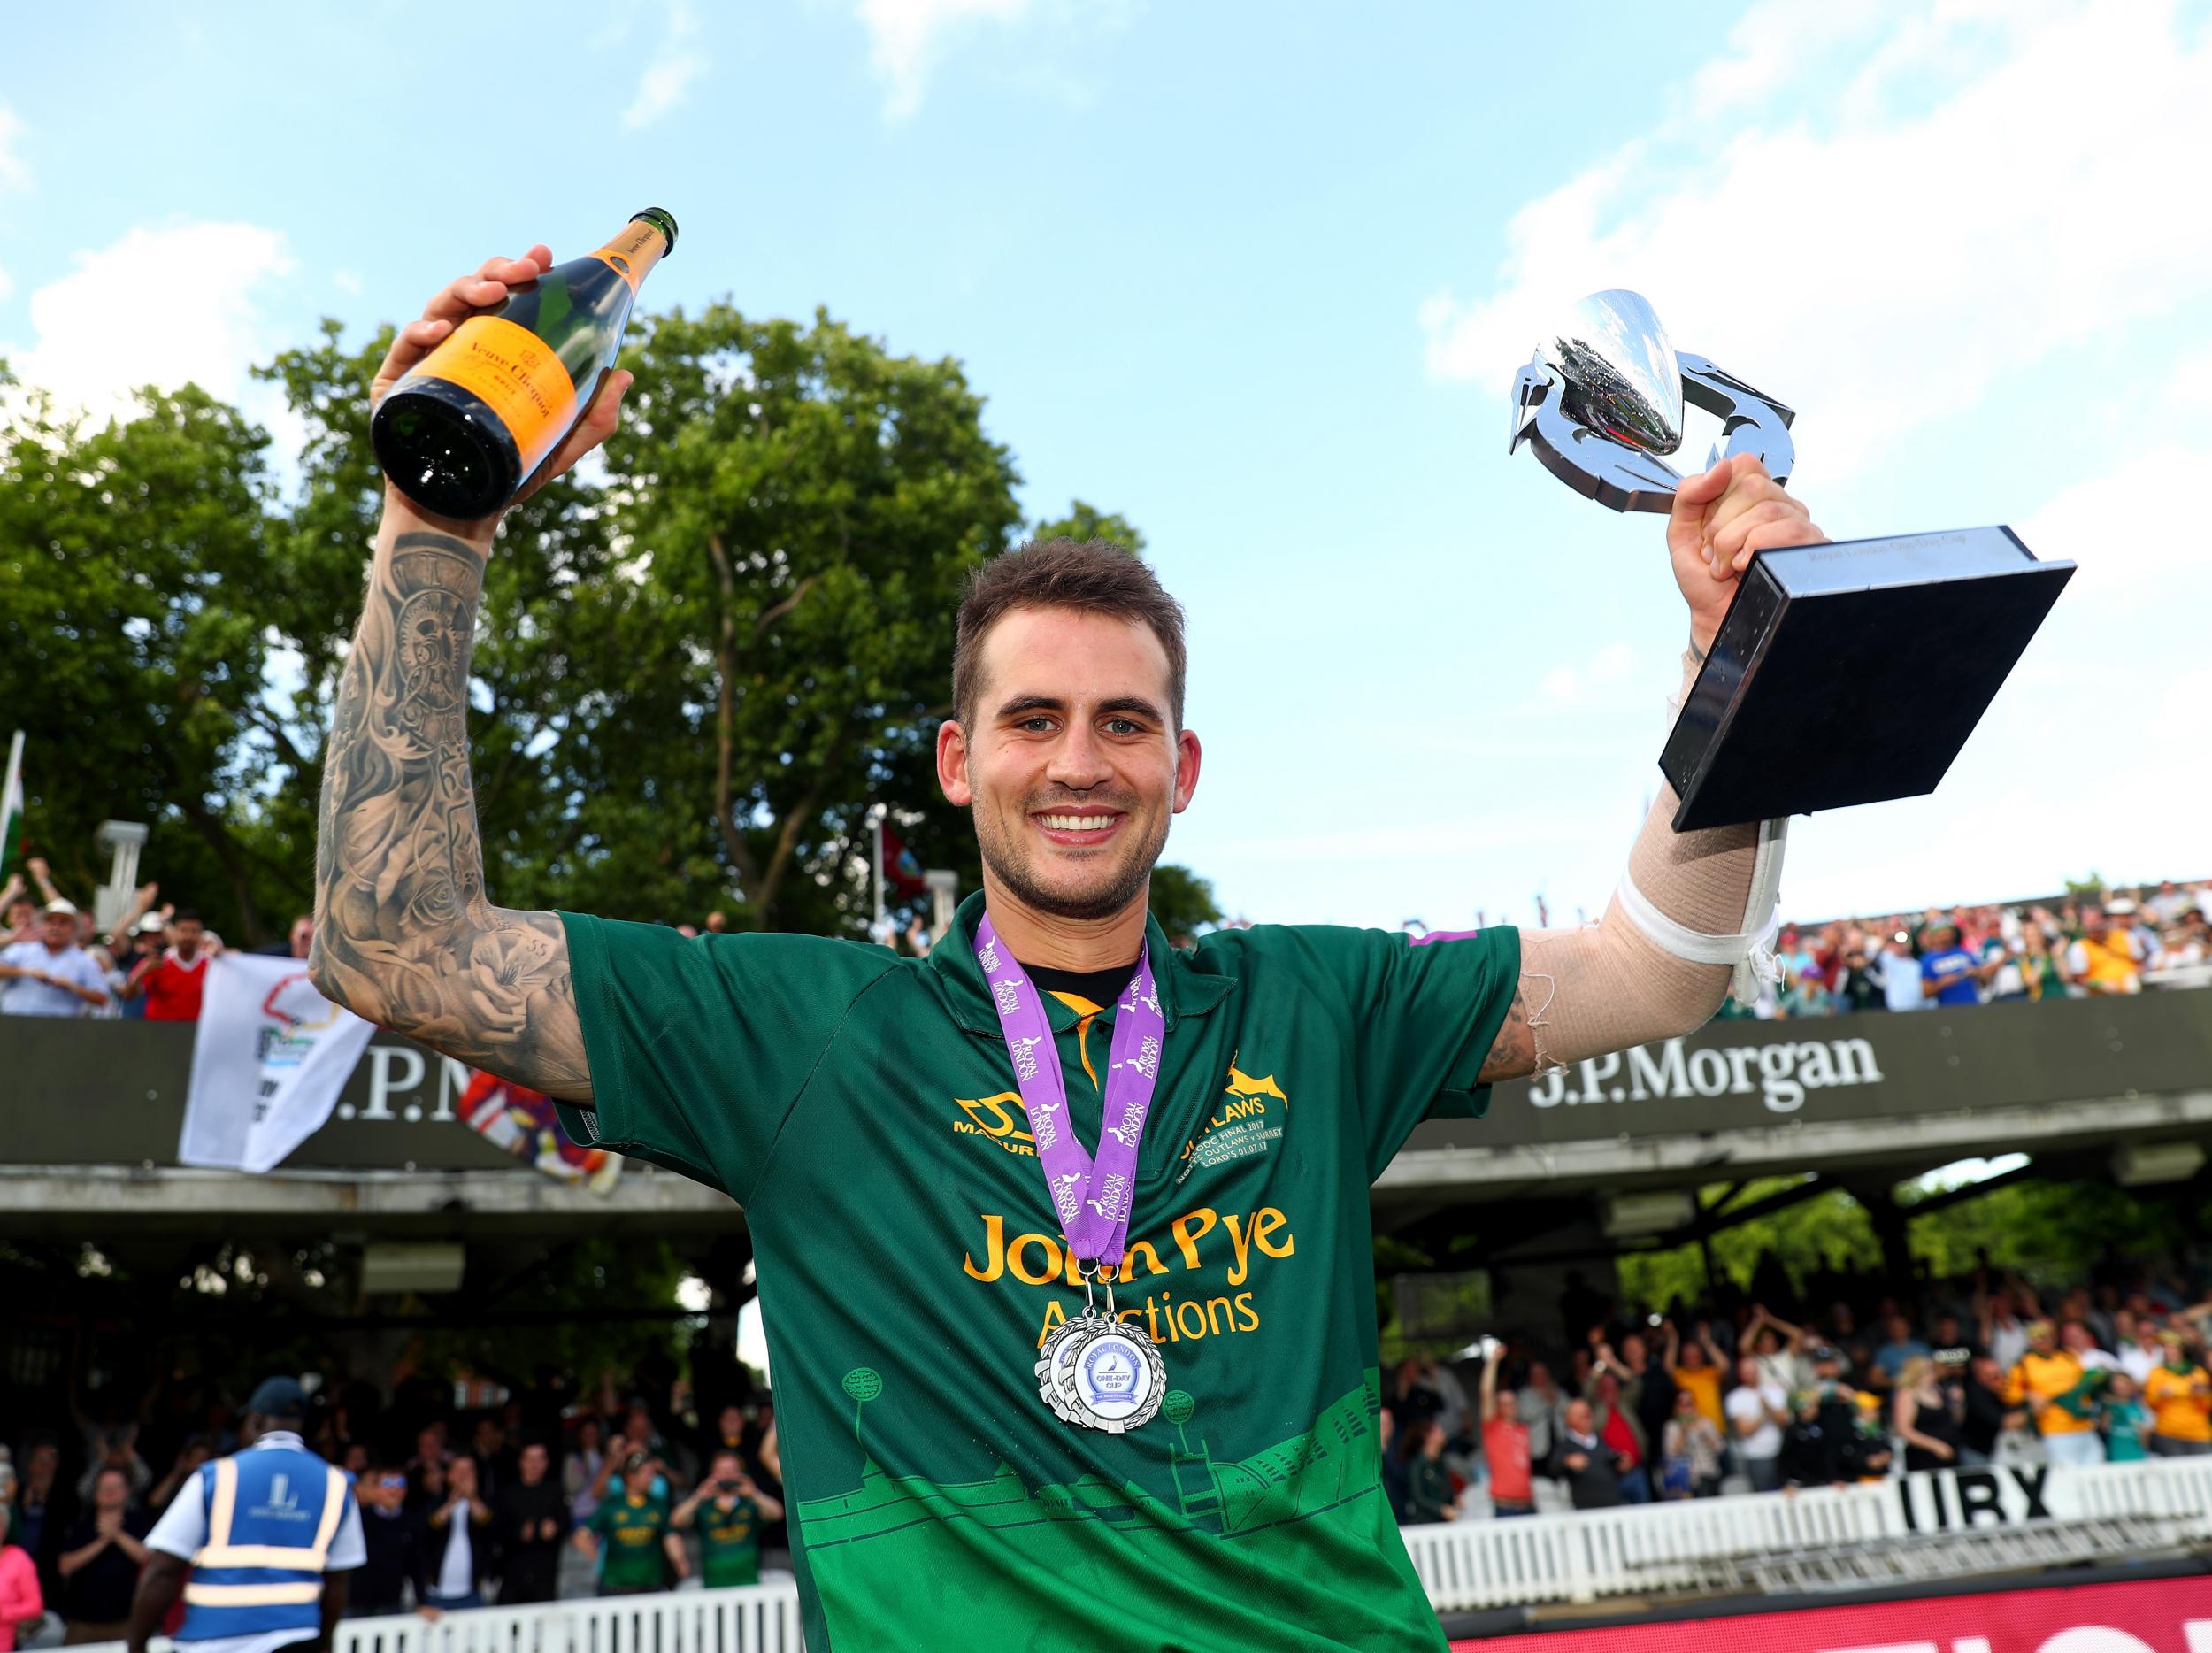 Hales and Notts have already tasted glory in one cup this season